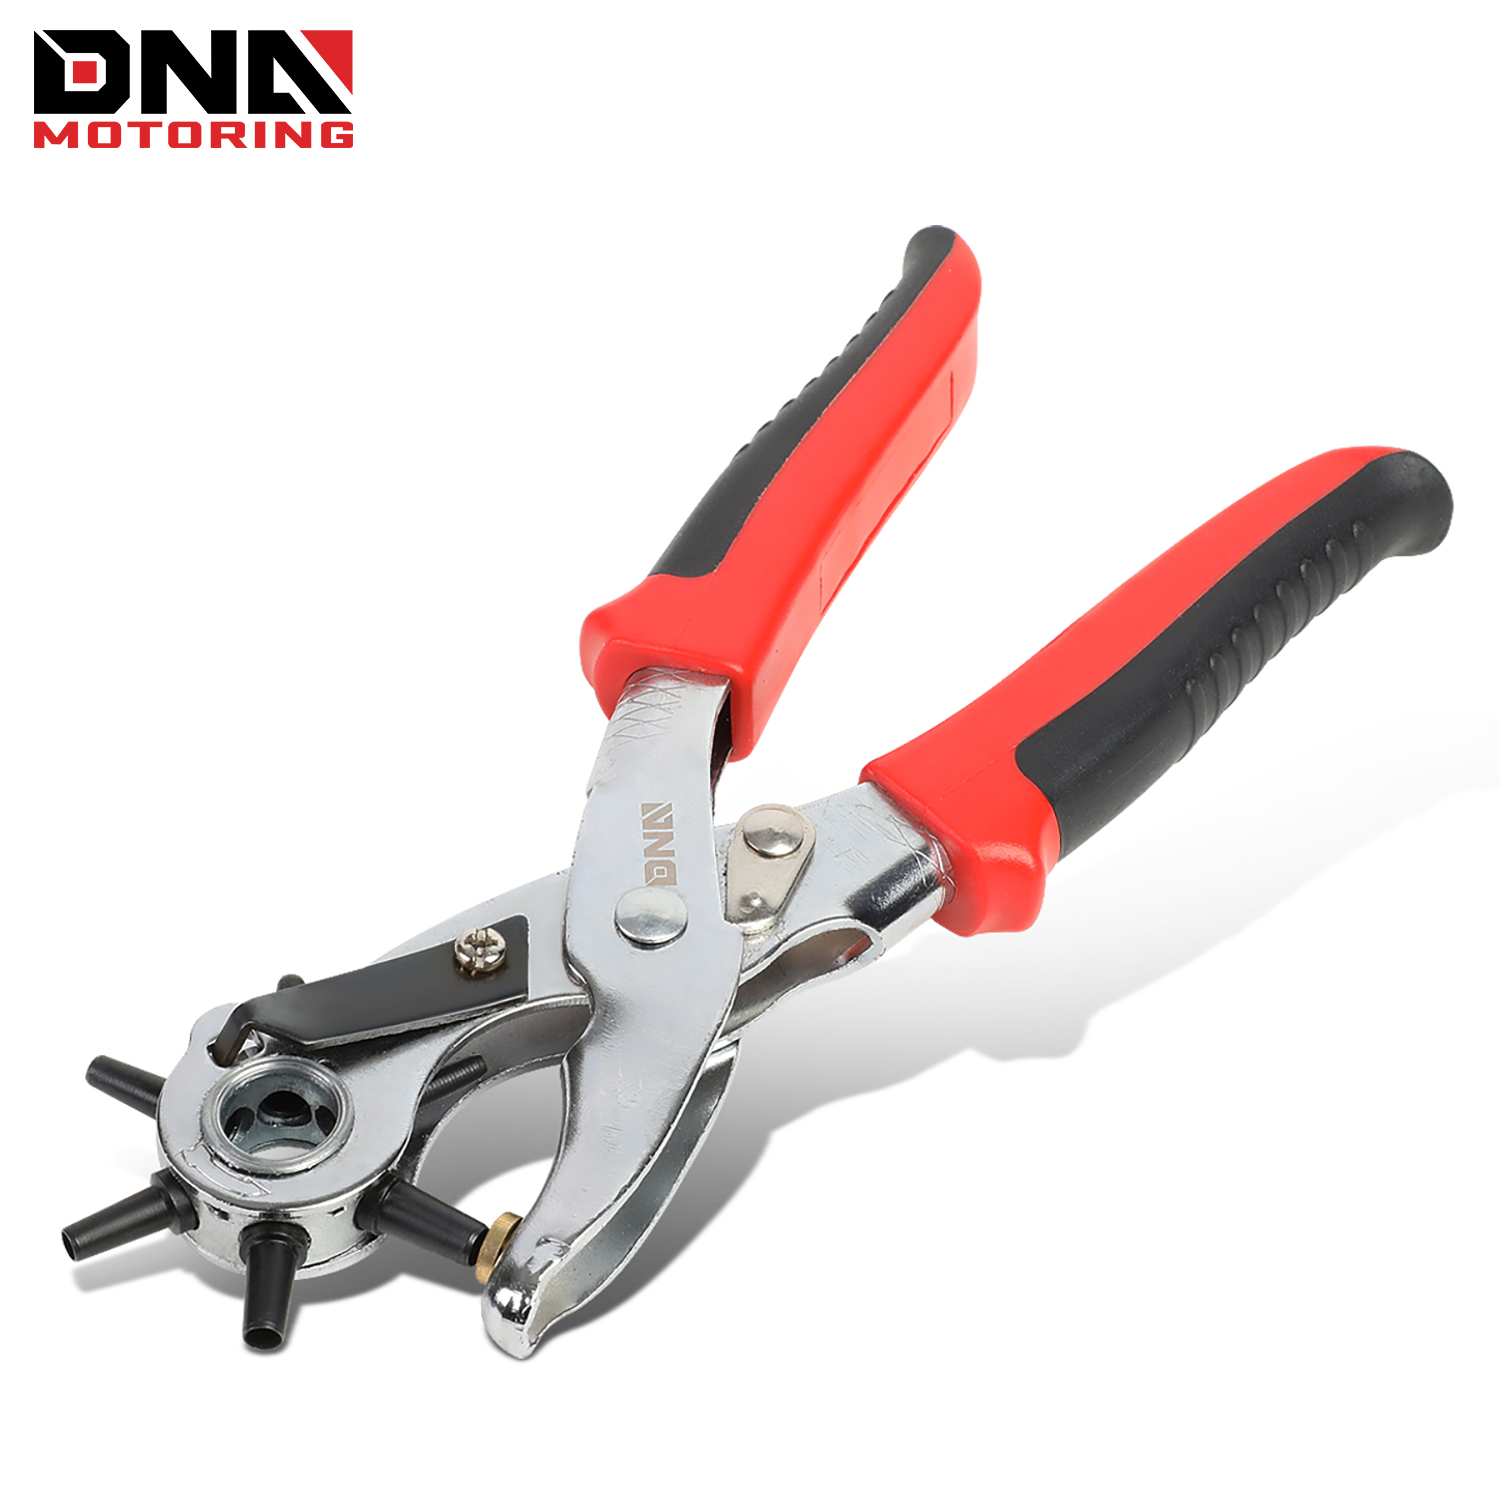 

Revolving Leather Hole Punch Tool, 6 Hollow Bell Punches Coated Steel Perfect For Belts Or Leather Material, 2mm-5mm, 1 Hole Punch, Red/black